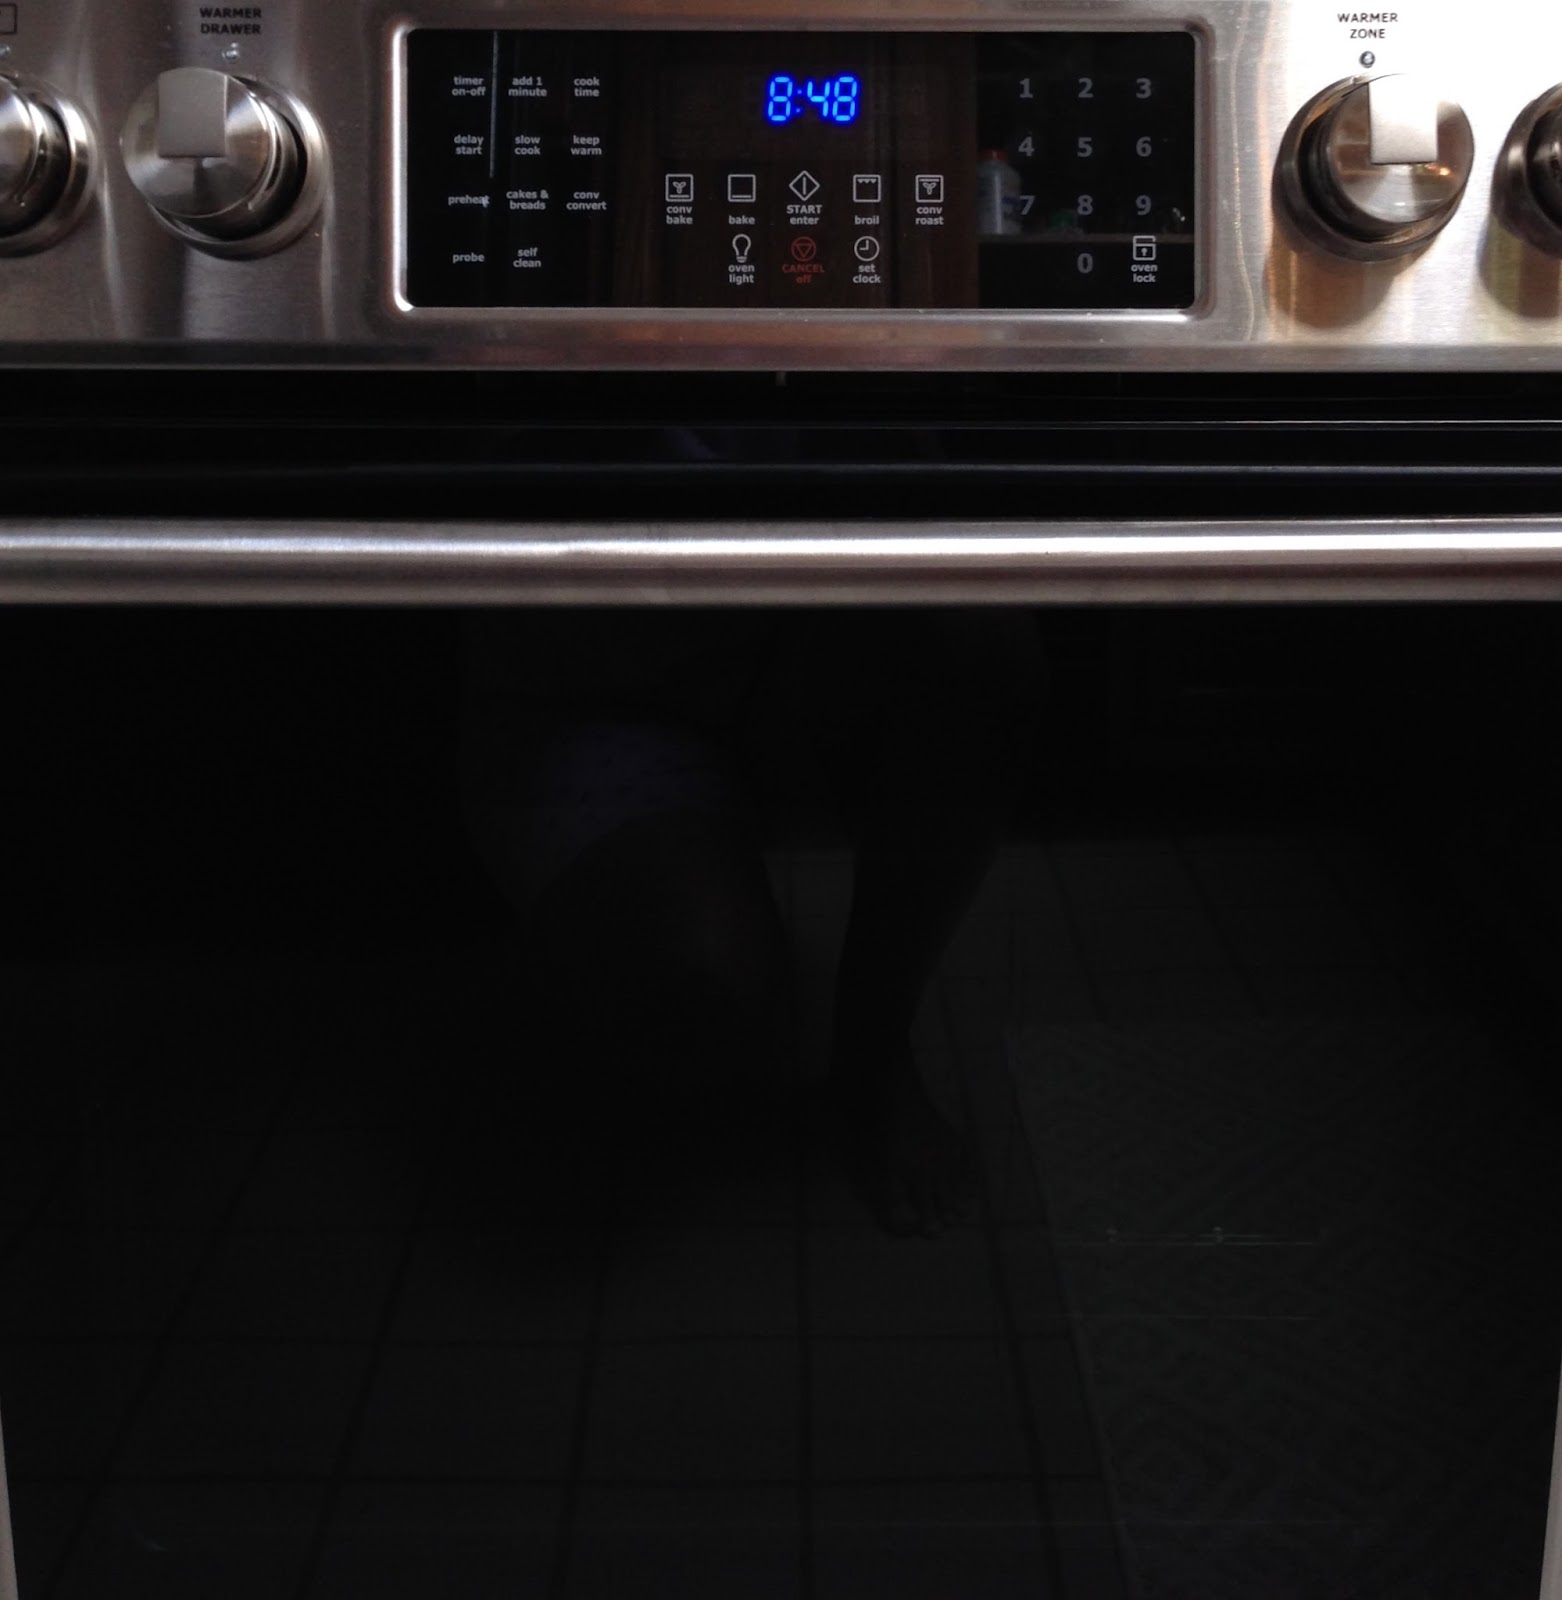 Learning to Eat Allergy-Free: The Challenge of Oven Temperature